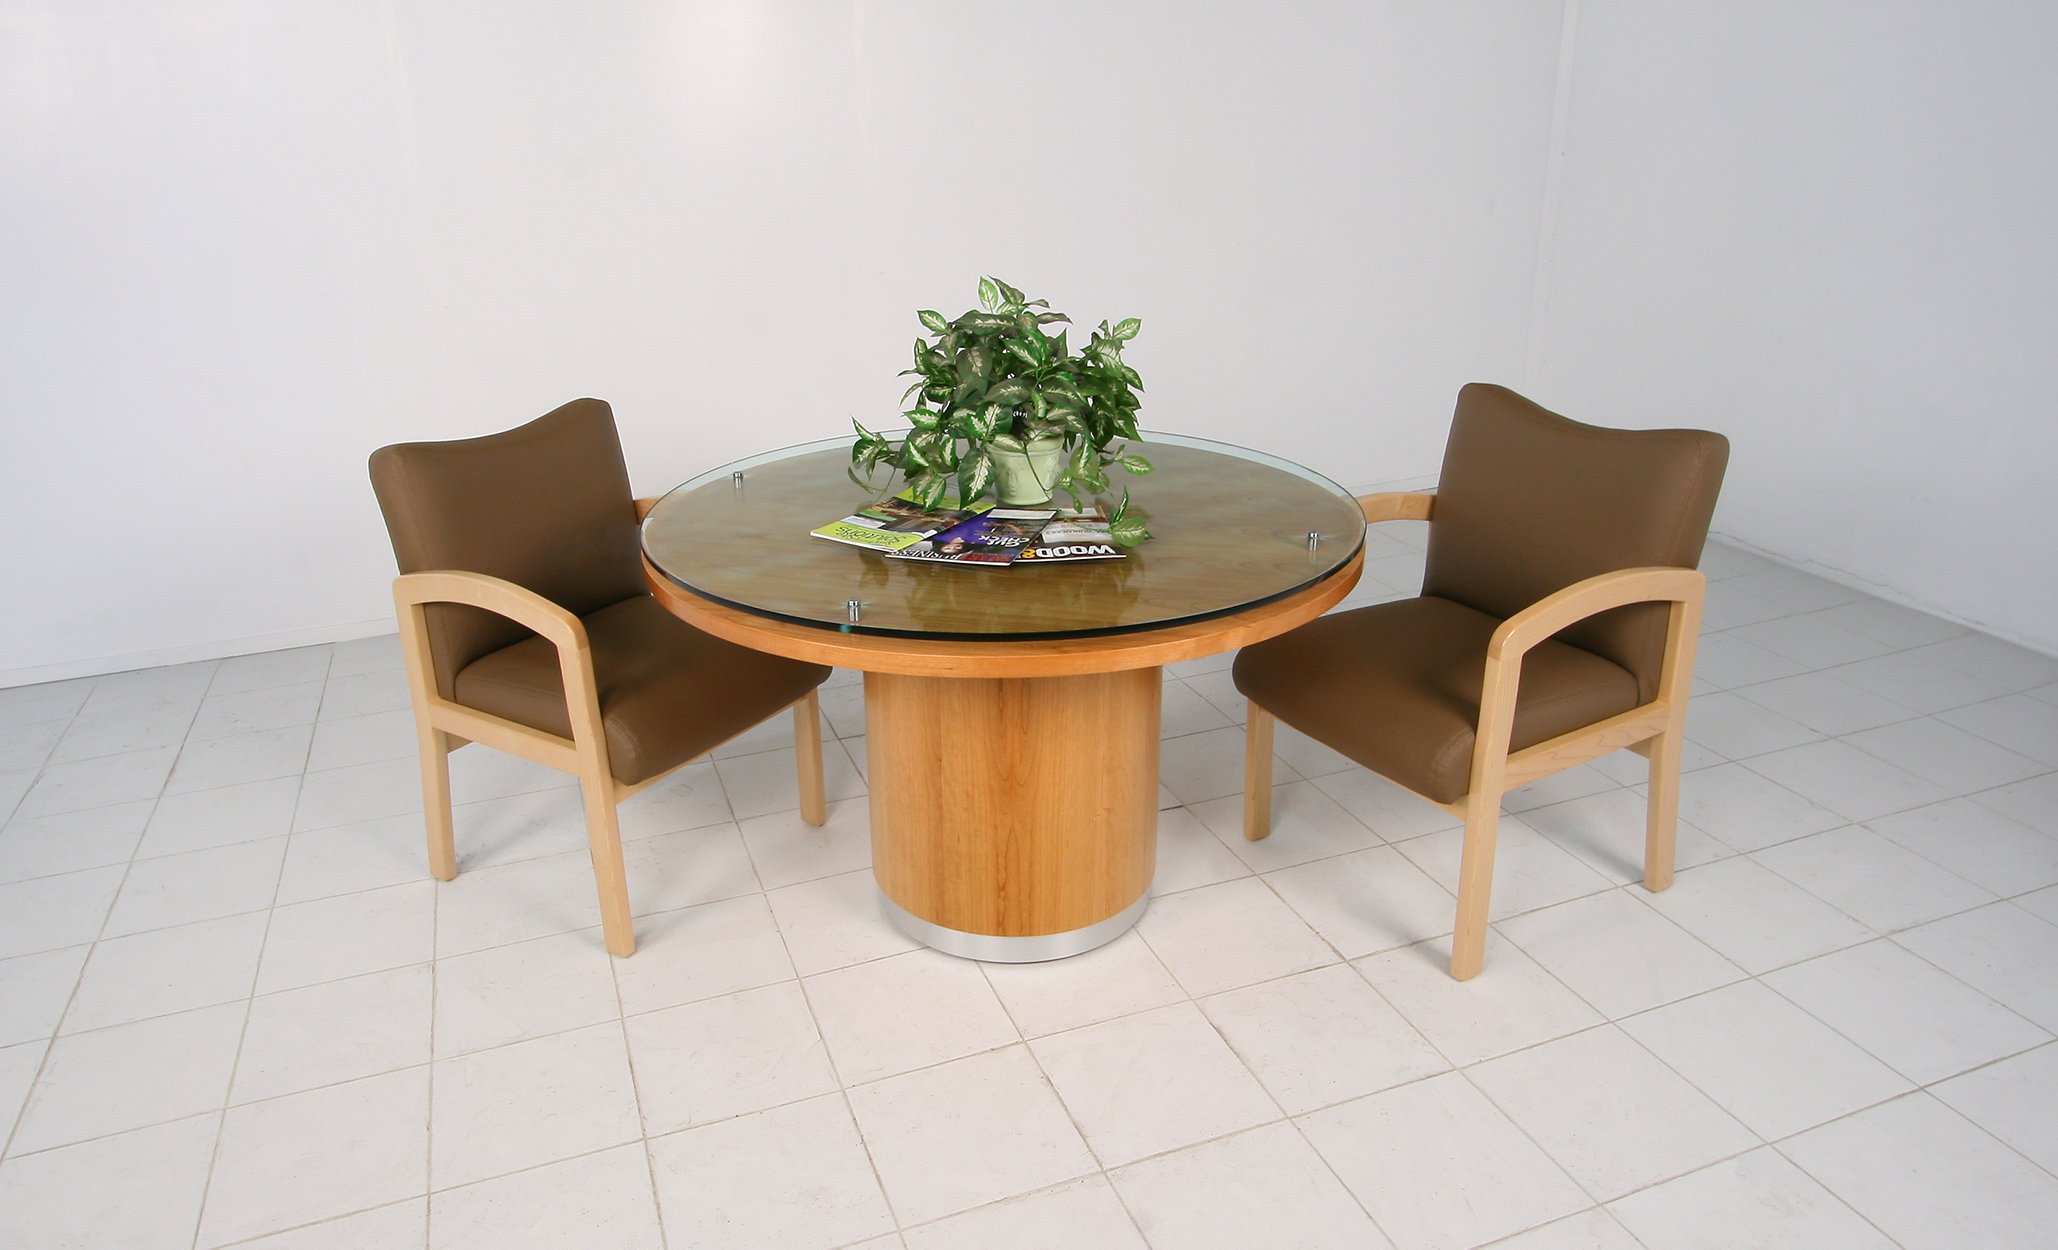 Vue table w FCF11 chairs.jpg